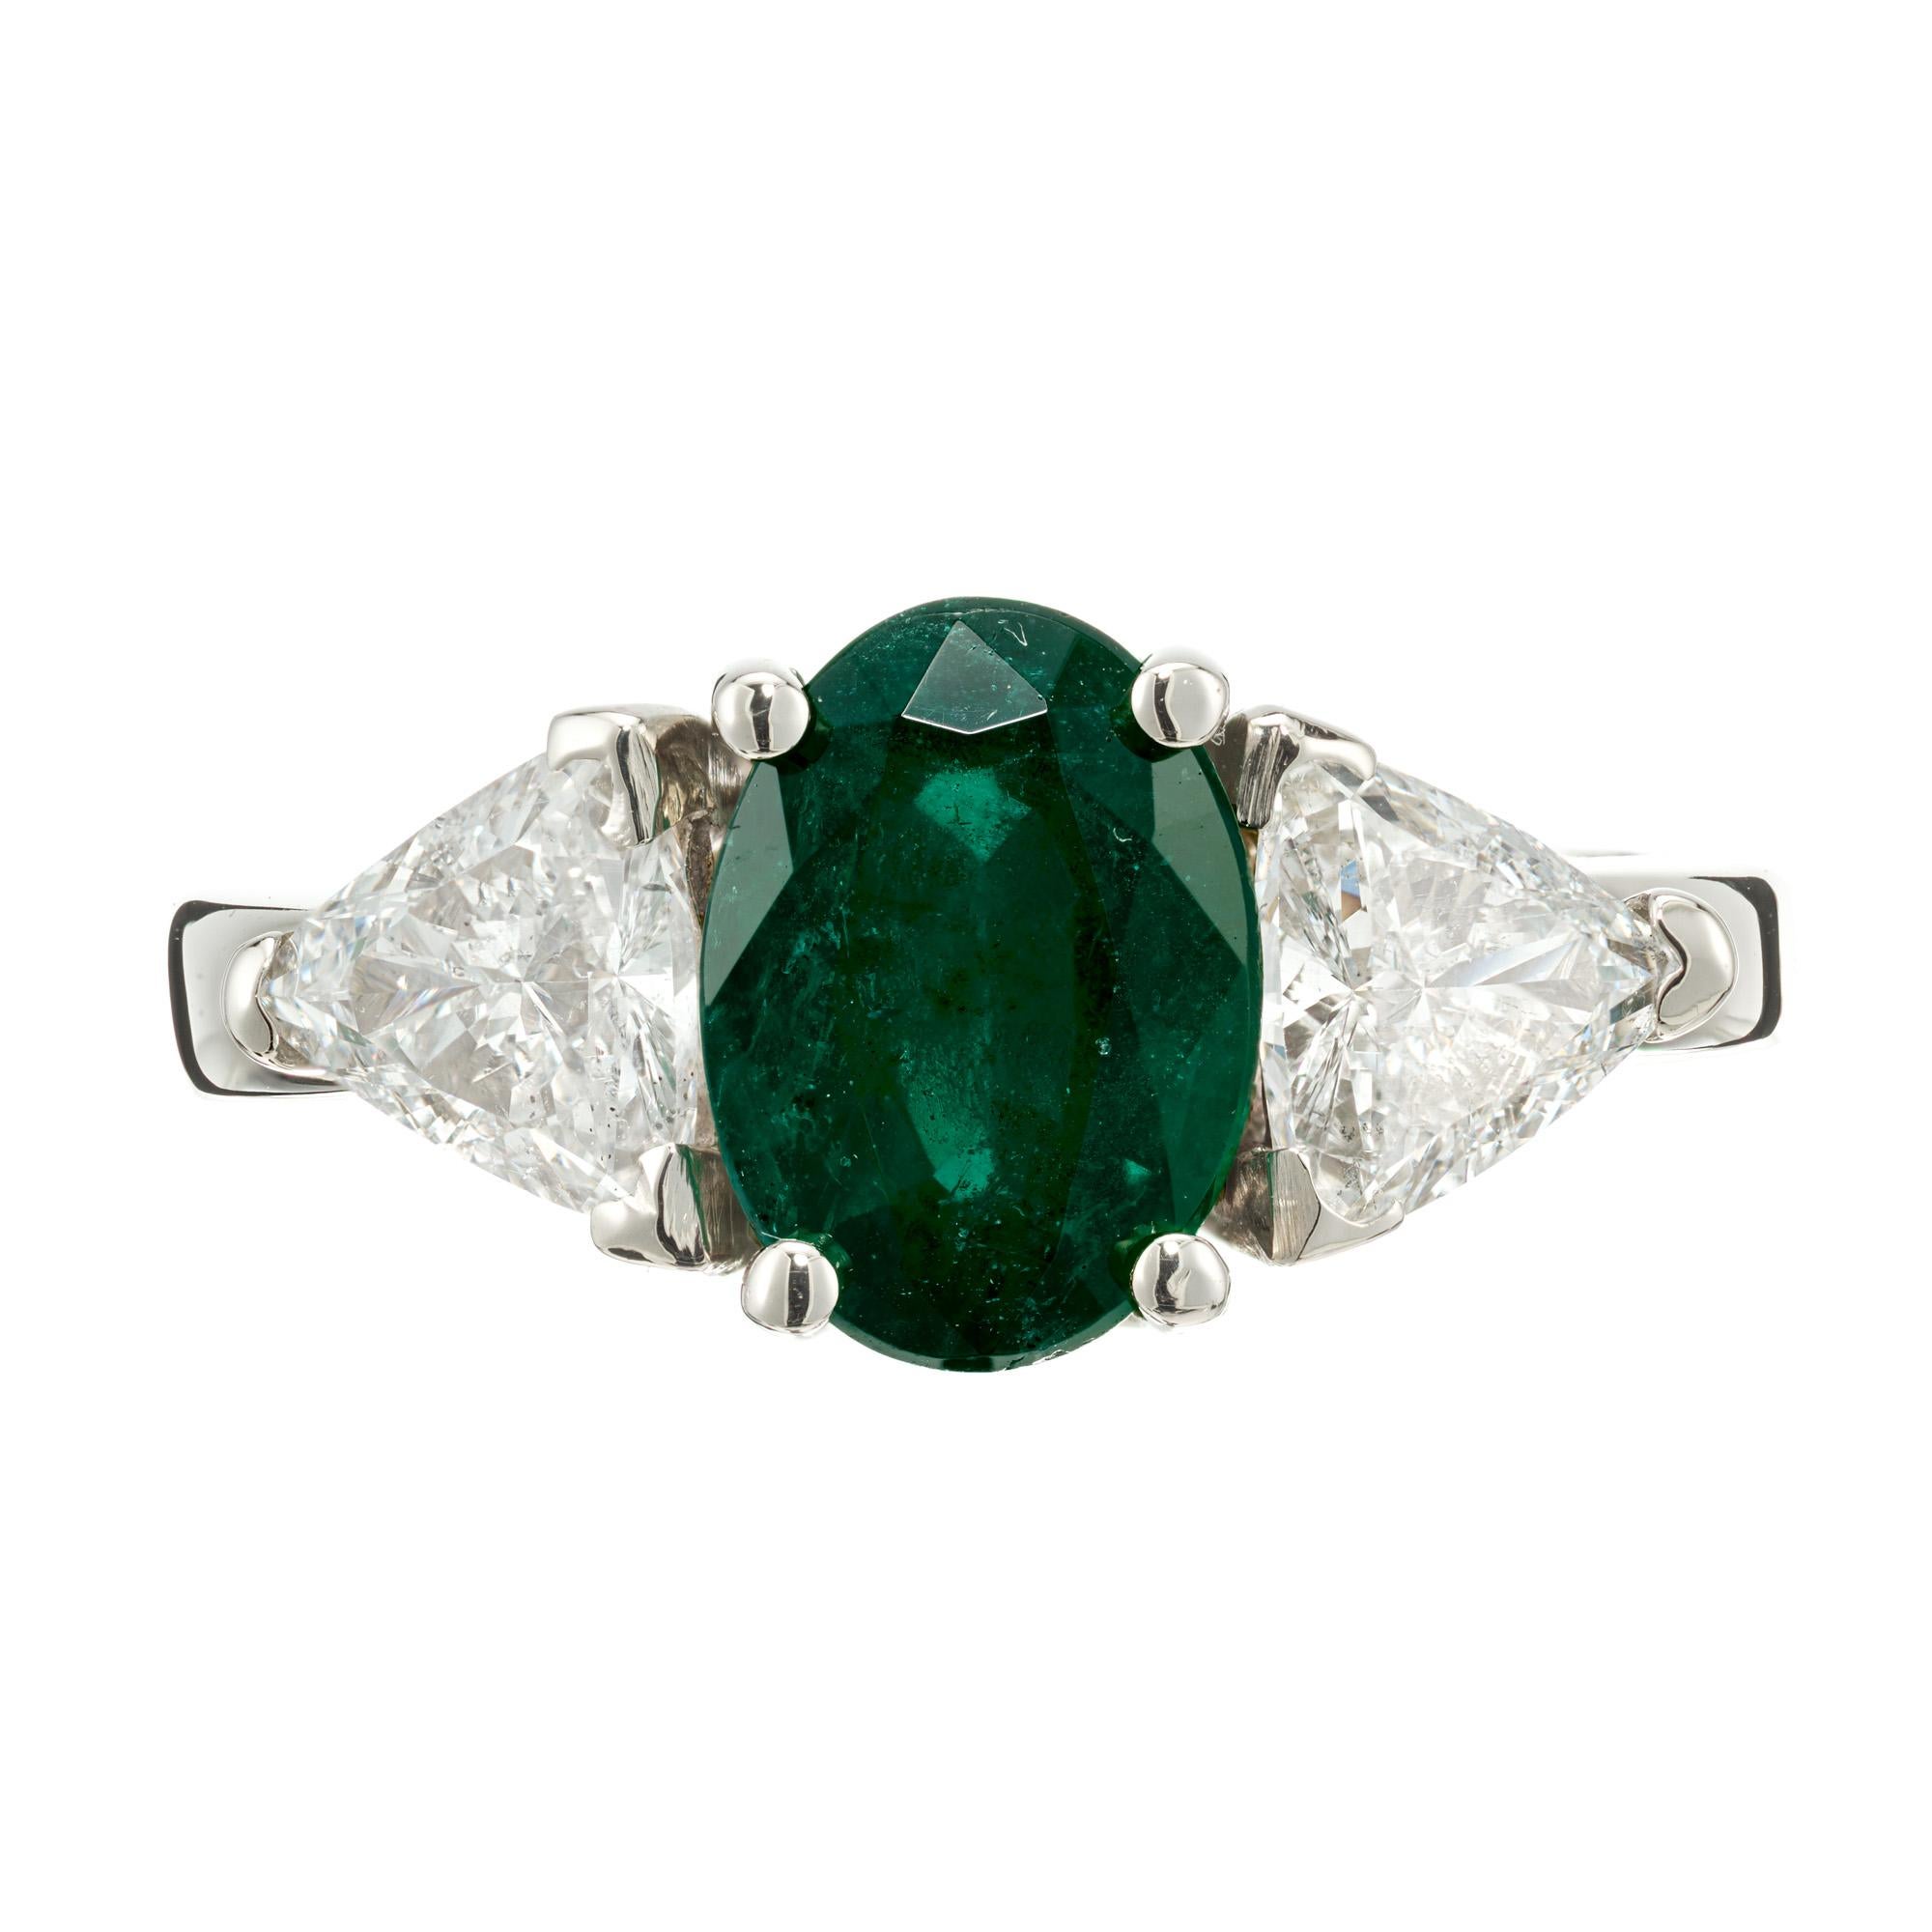 Emerald and diamond engagement ring. GIA certified oval emerald center stone set in a 14k white gold three-stone setting with two well cut trilliant side diamonds. Certified low level F1 clarity enhancement only. 

1 oval gem green Emerald, approx.